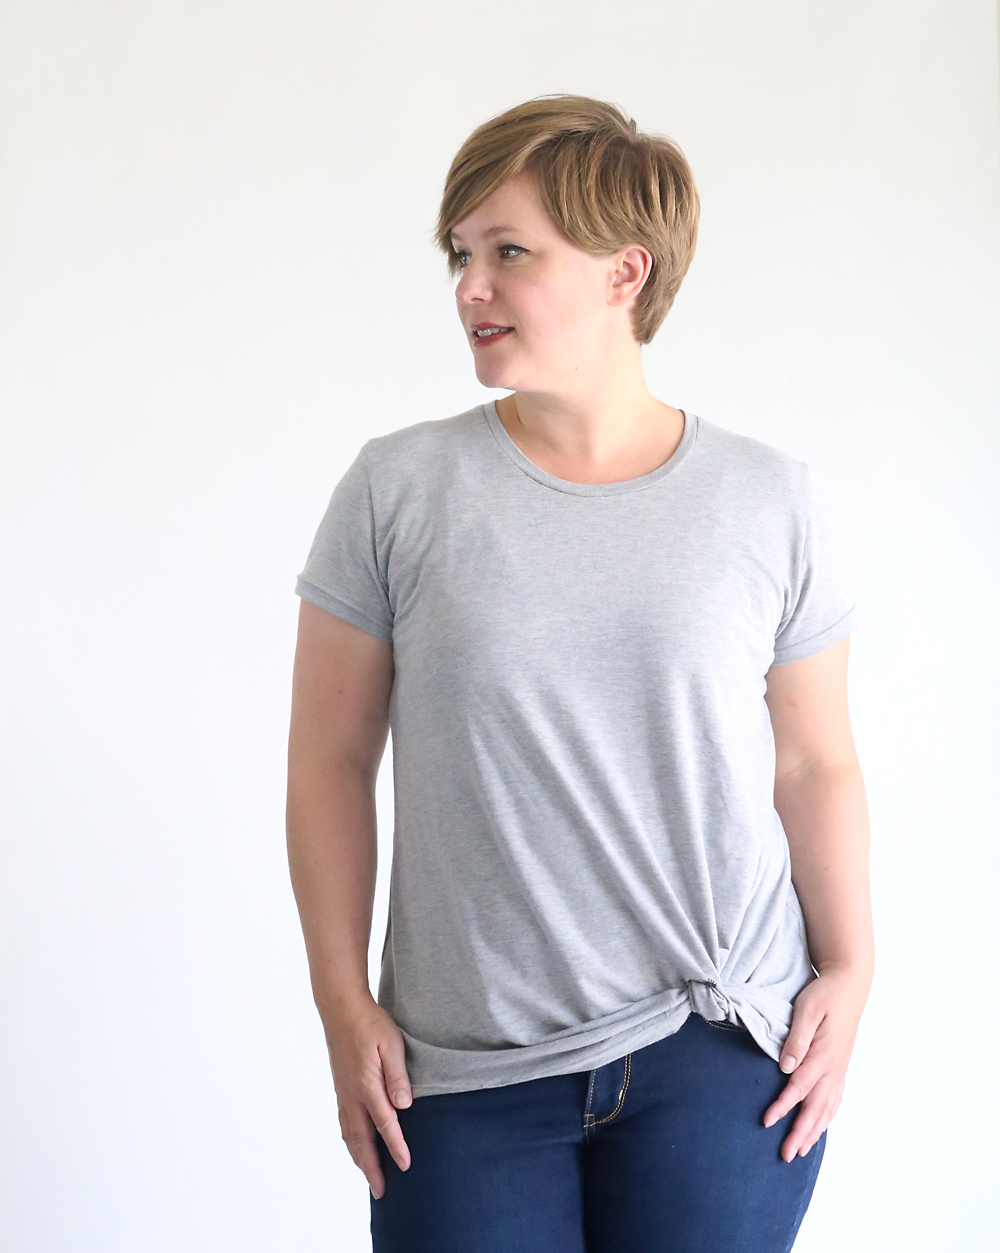 The Twist Knot Tee free sewing pattern - It's Always Autumn